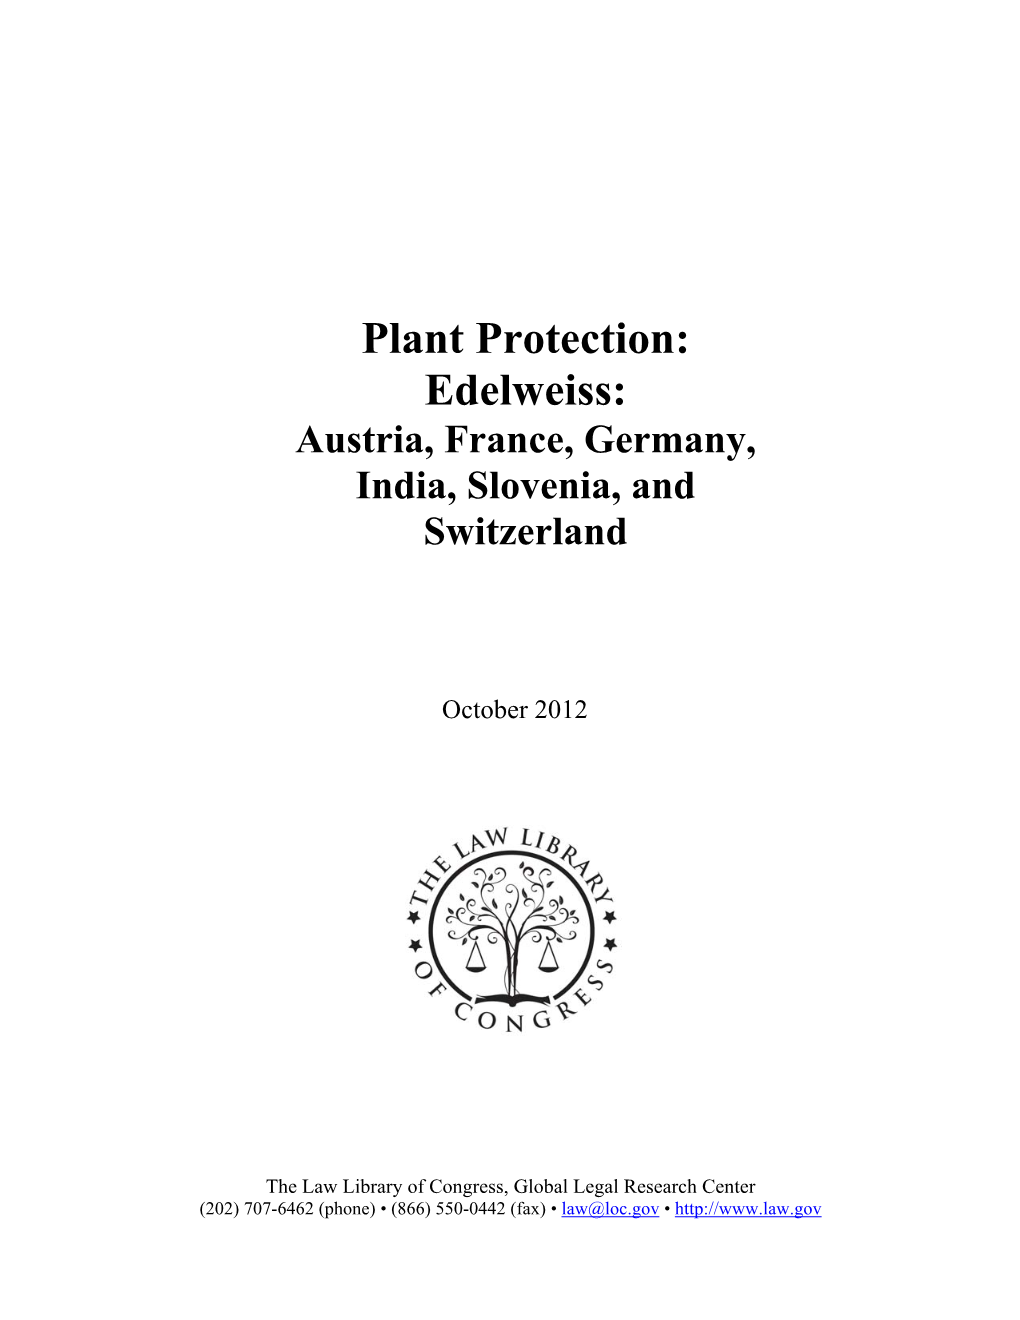 Plant Protection of Edelweiss in Austria, France, Germany, India